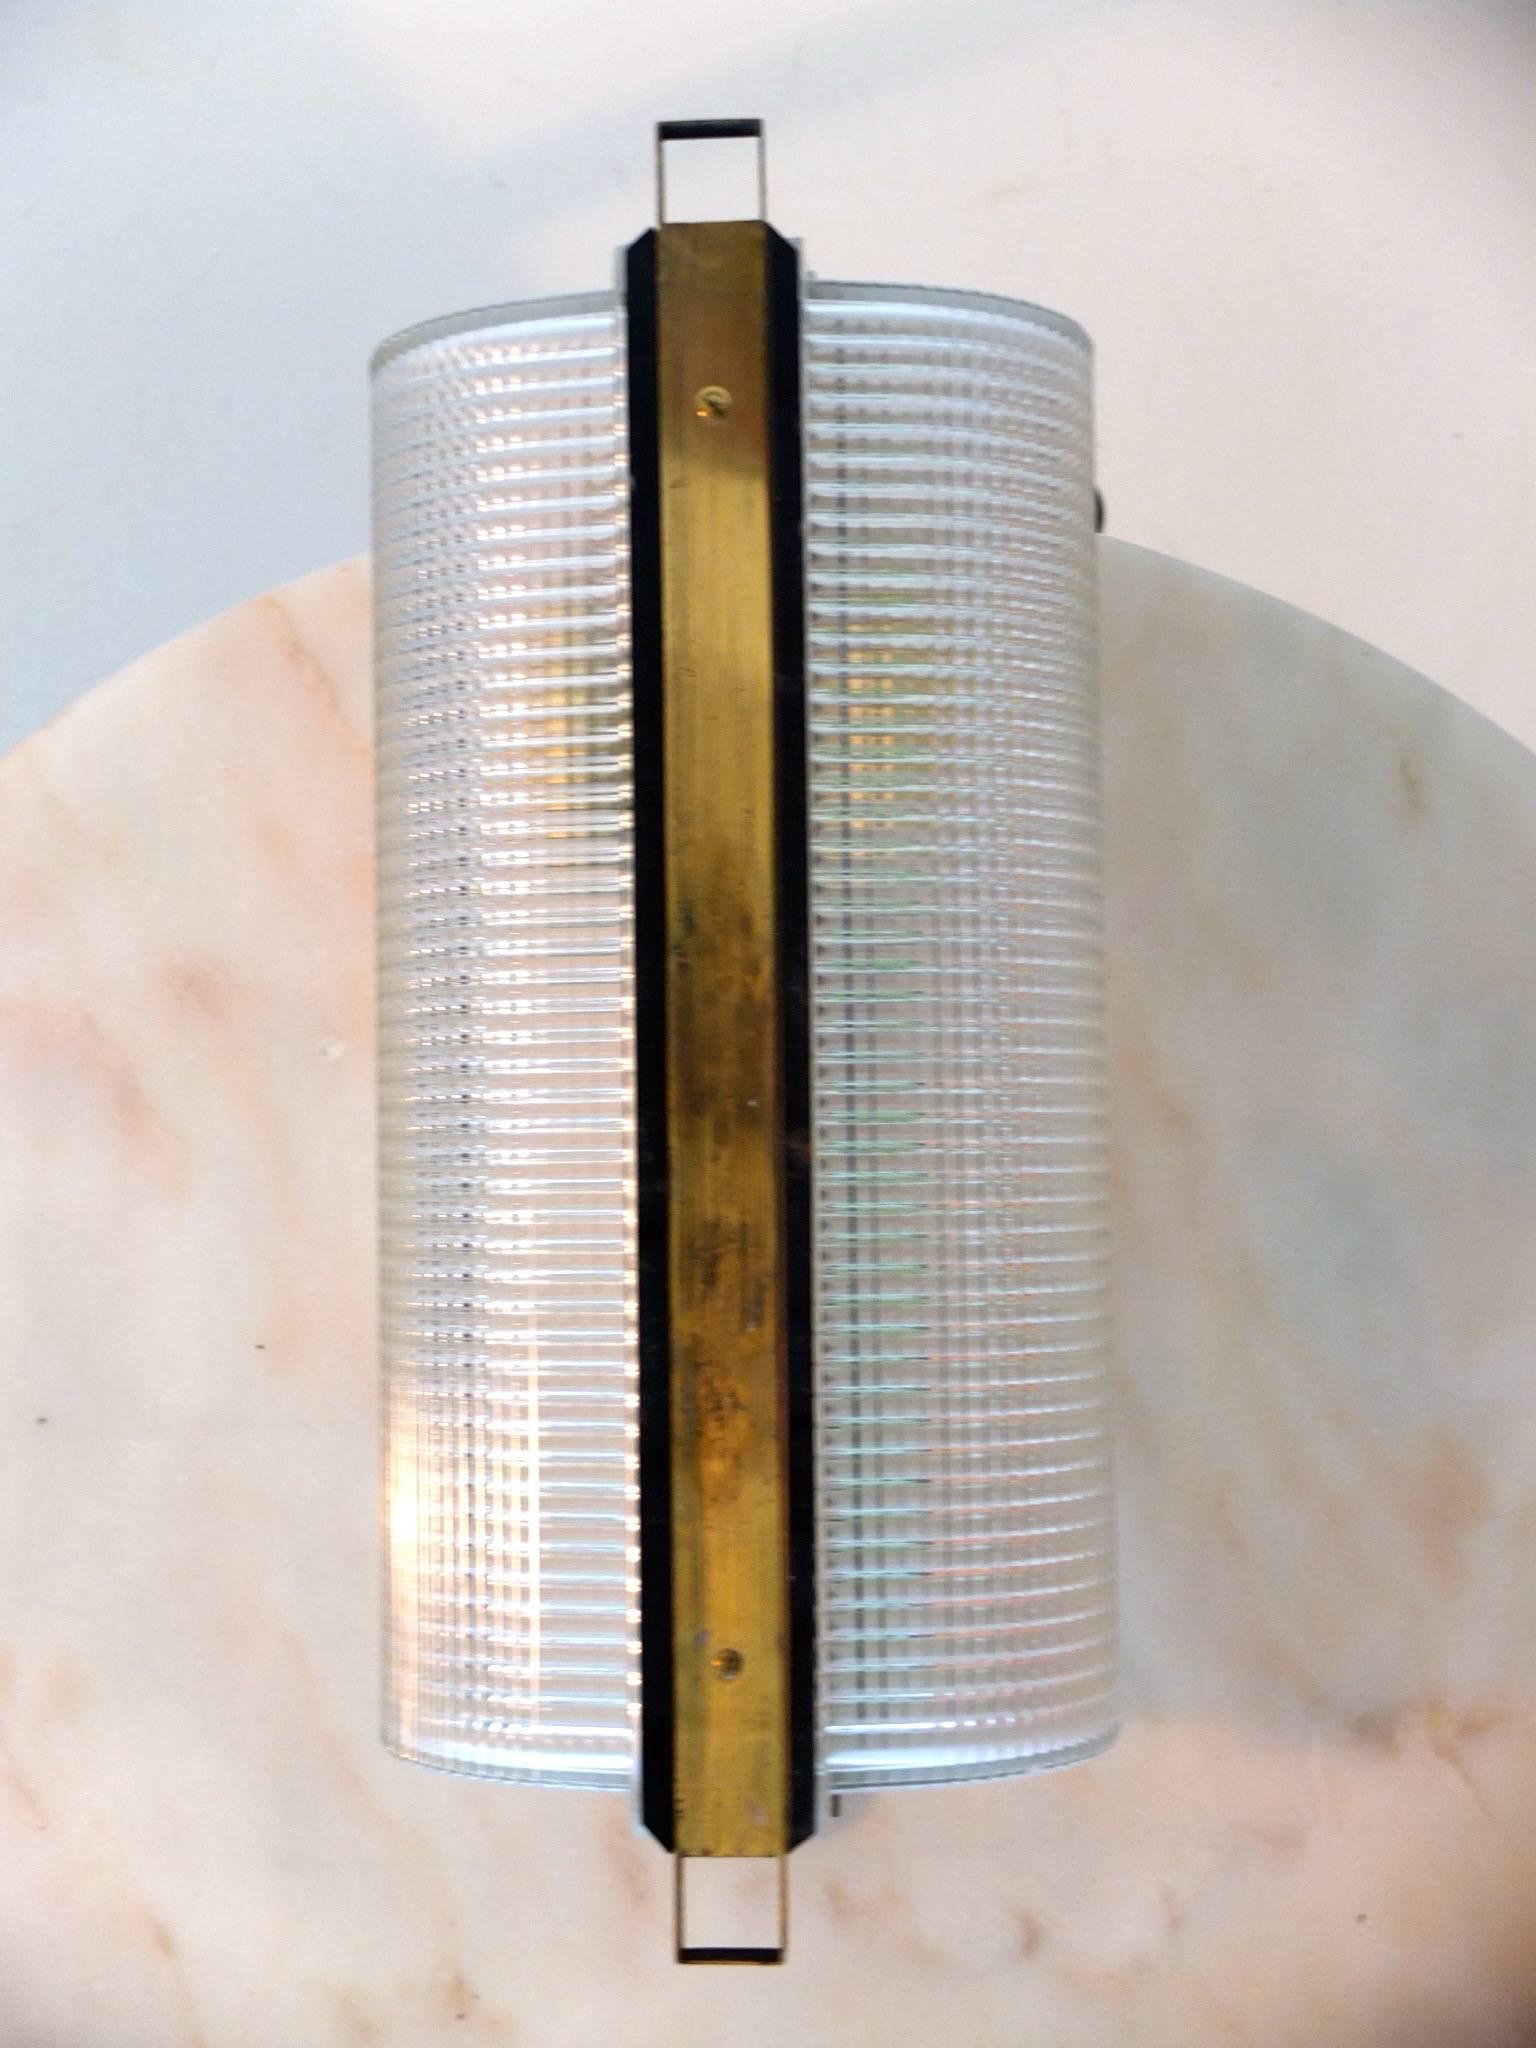 This wall mounted lamp is part of an unusual collection of lighting by Stilnovo which I acquired as a group. The glass is textured similar to Fresnel or Holophane or the lens of an automobile headlamp. The glass is in two halves banded by the matte